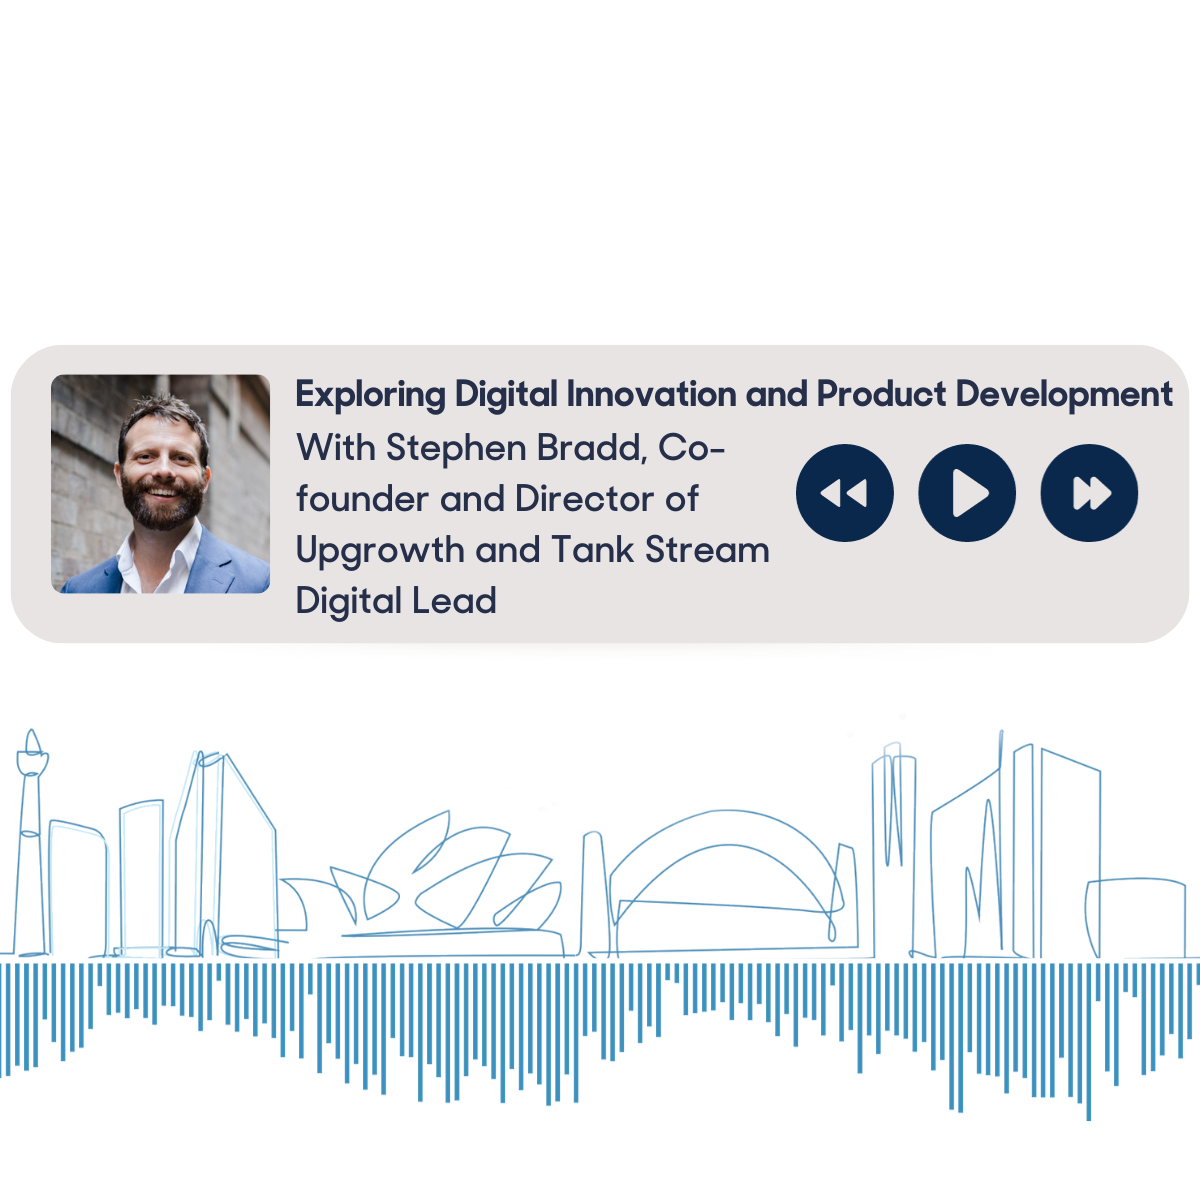 Exploring Digital Innovation and Product Development With Stephen Bradd, Co-founder and Director of Upgrowth and Tank Stream Digital Lead